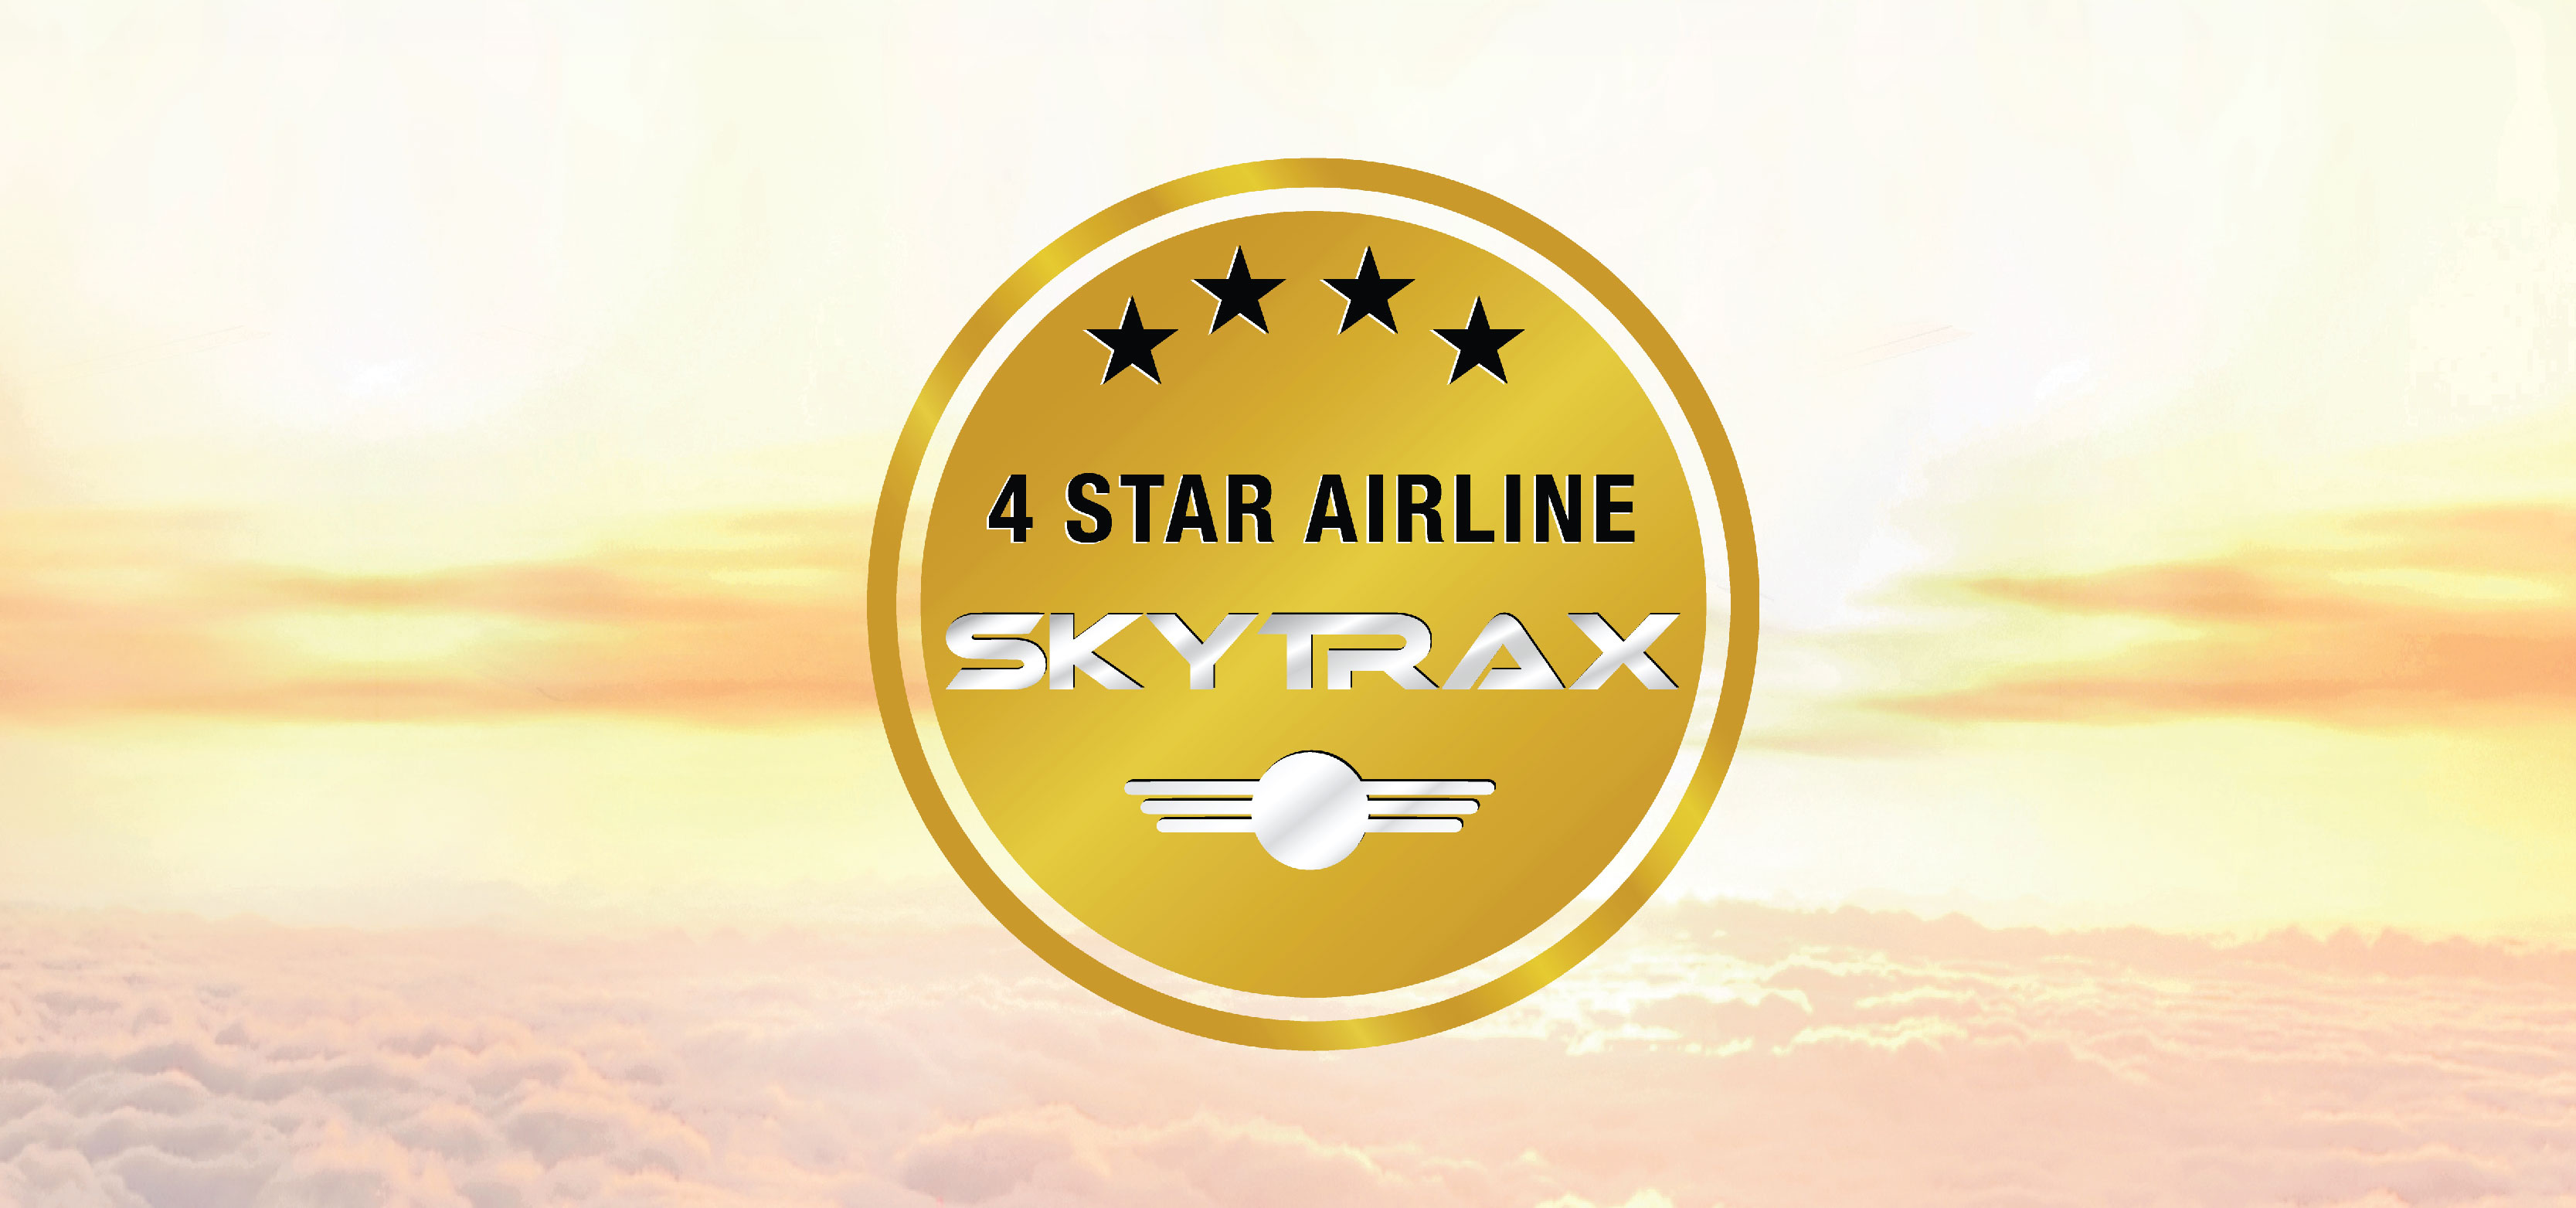 RB a 4-star airline as awarded by Skytrax